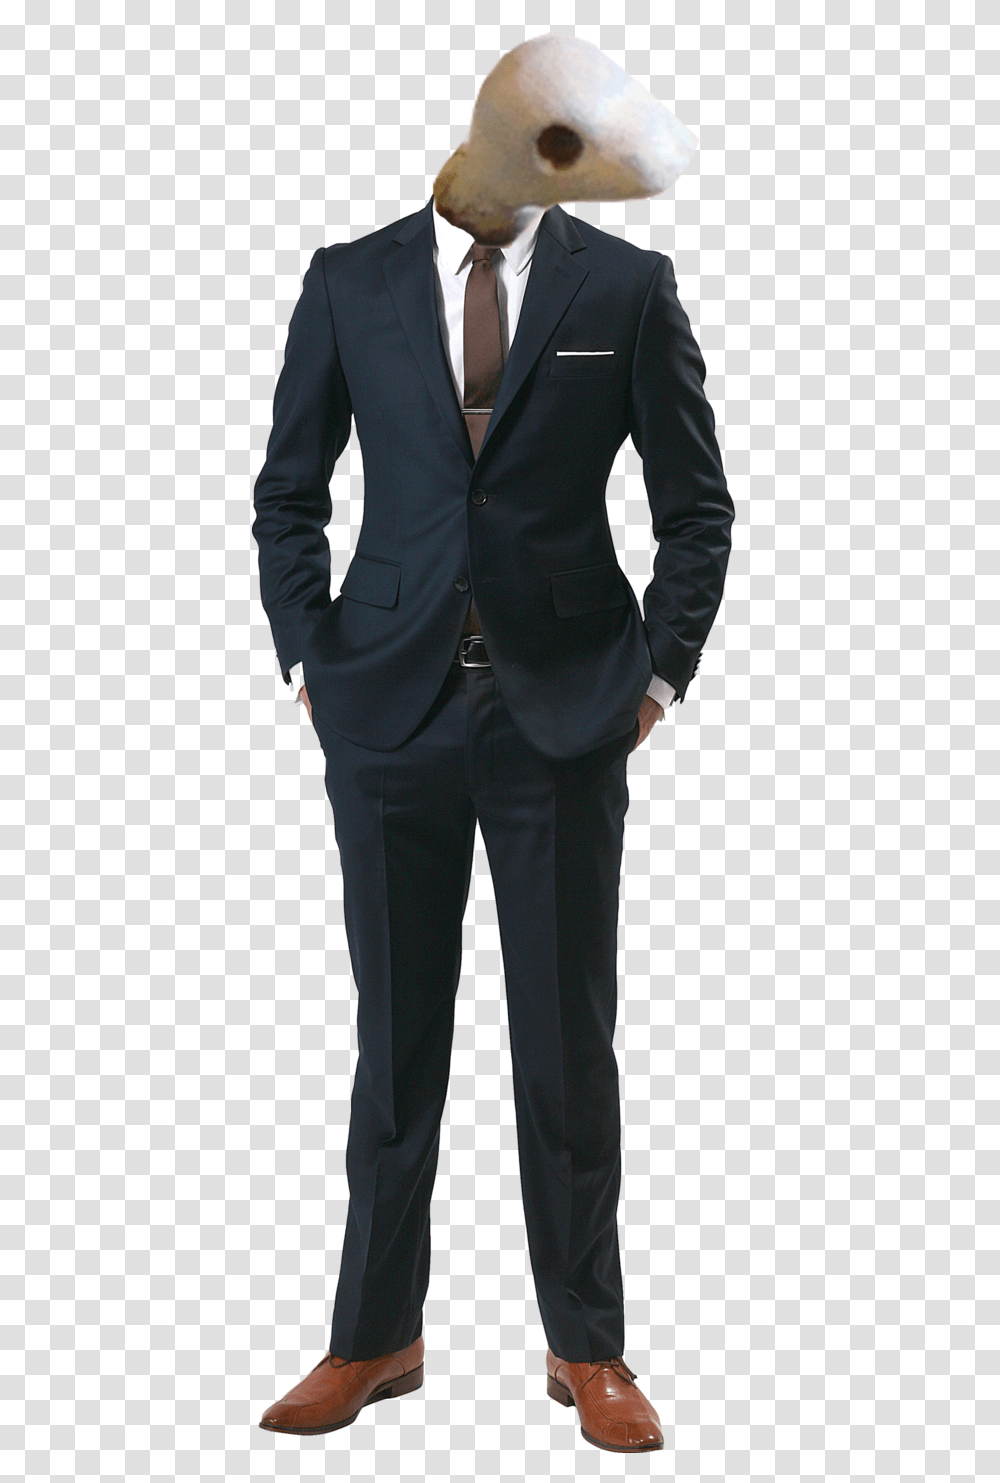 Photoshop Garbage 4 Skeleturtle The Businessman By Full Body Businessman, Suit, Overcoat, Tuxedo Transparent Png